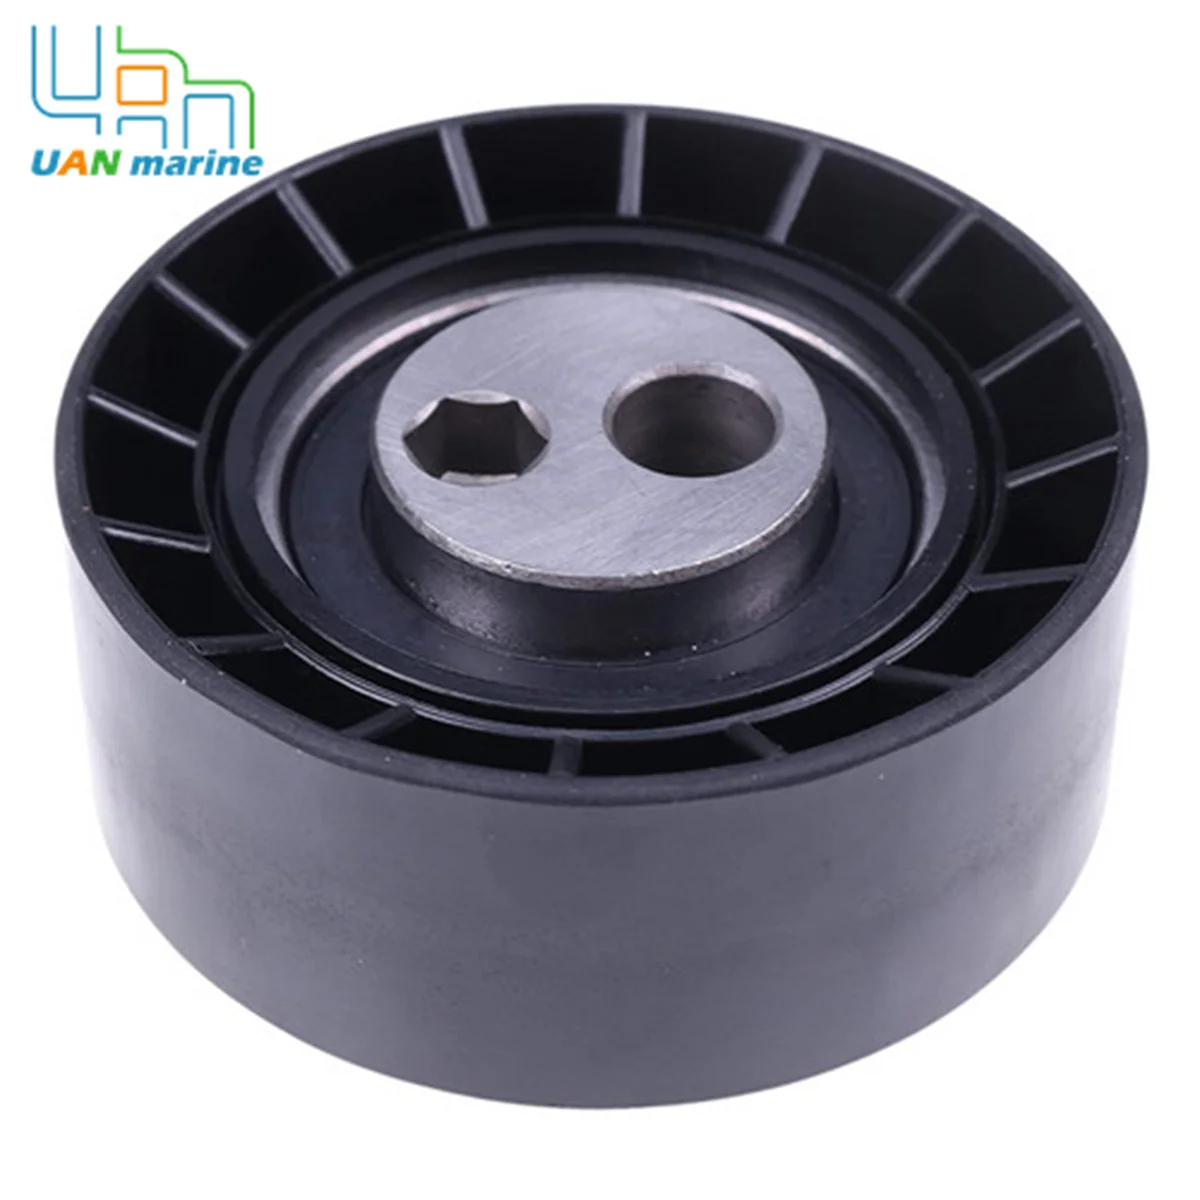 70mm Serpentine Belt Tensioner Pulley For Volvo Penta  KAD42P-A  KAMD42P-A  KDA42B Replaces  861563 877180 crankshaft pulley holder for volvo